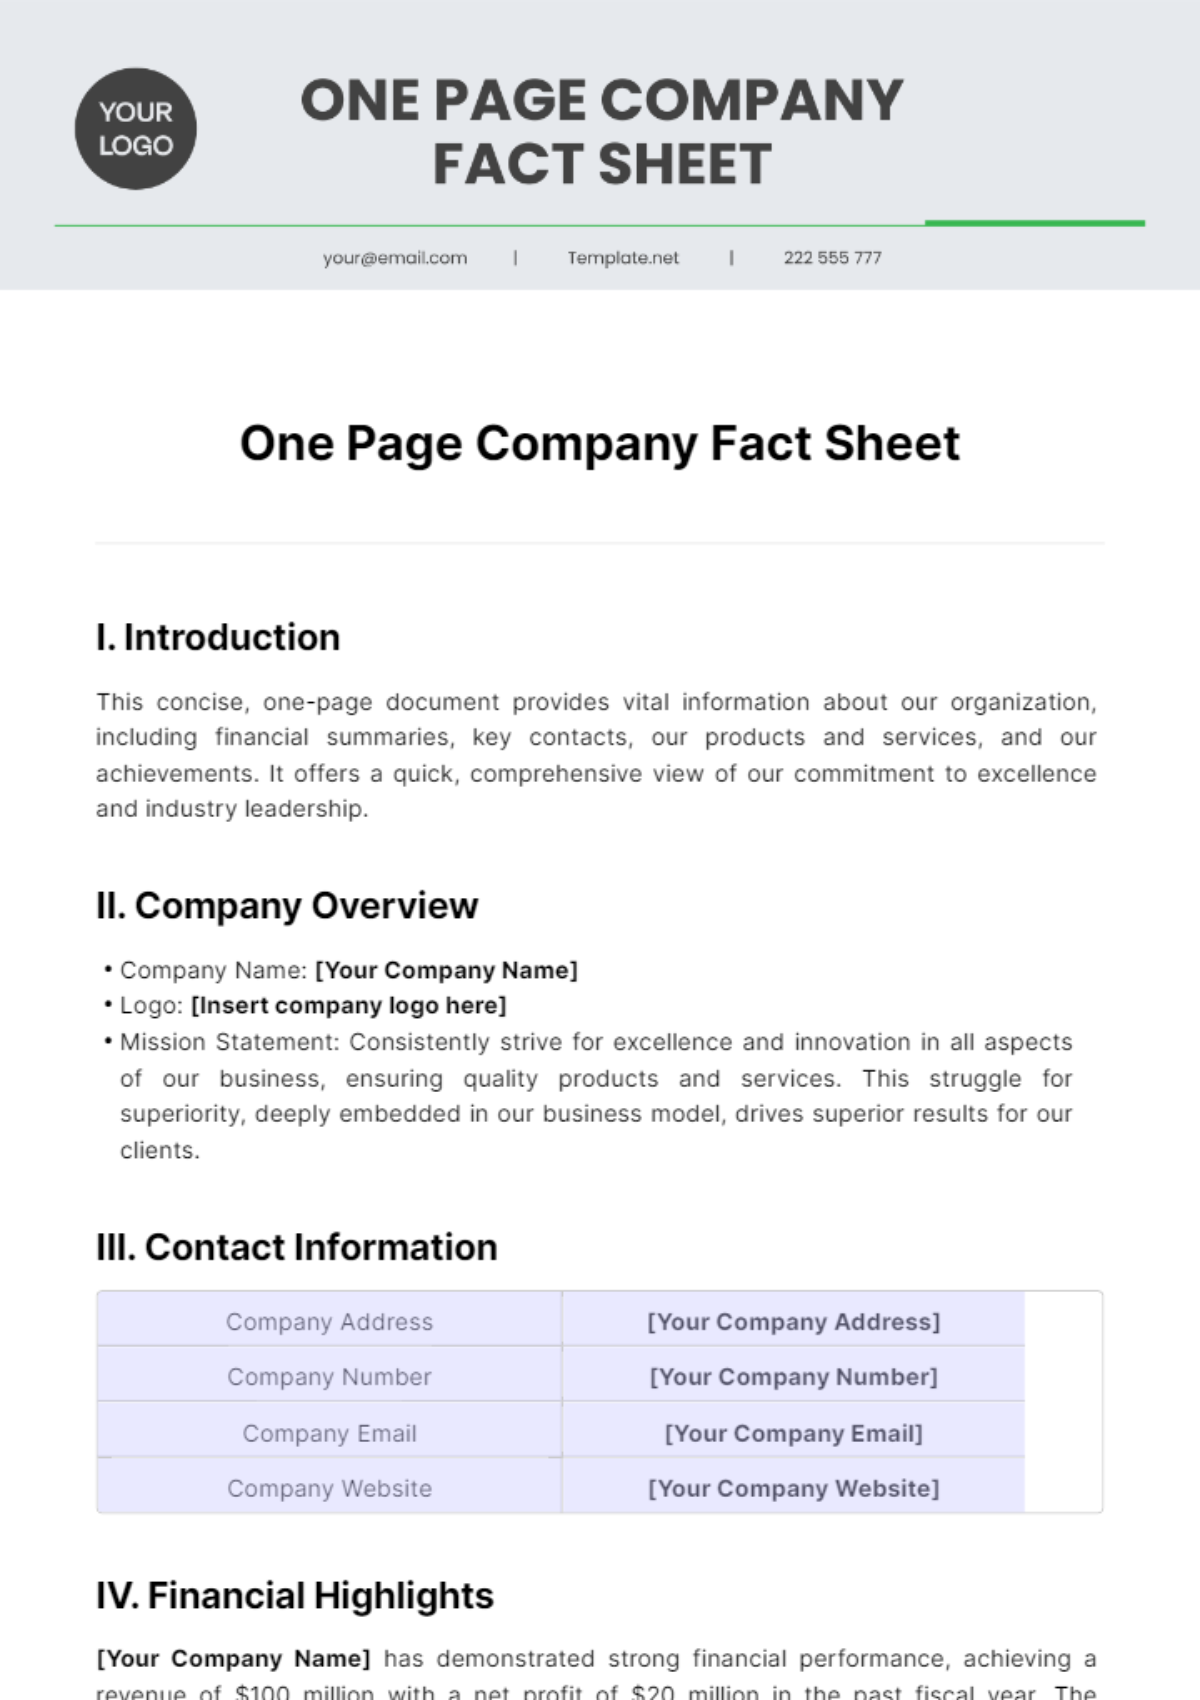 One Page Company Fact Sheet Template